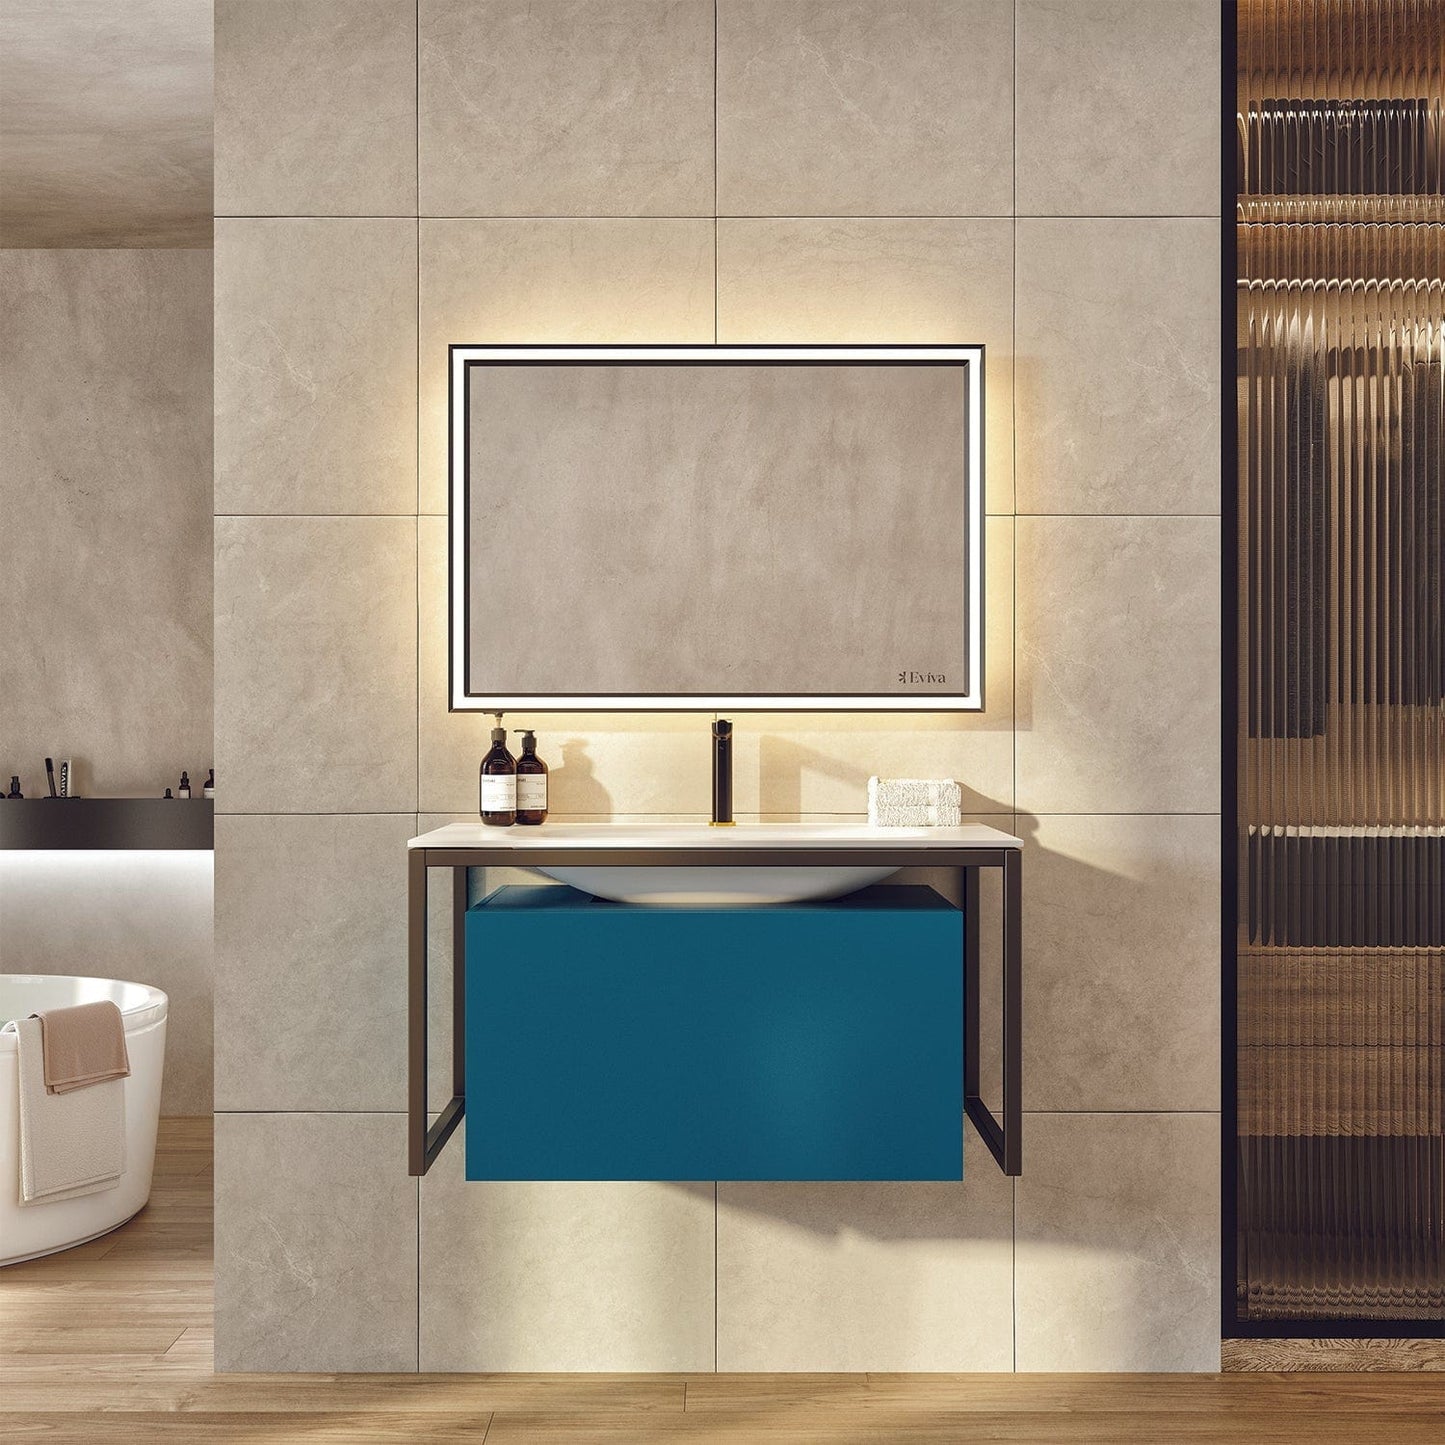 Eviva Modena 32" Wall Mounted Teal Bathroom Vanity with White Integrated Solid Surface Countertop